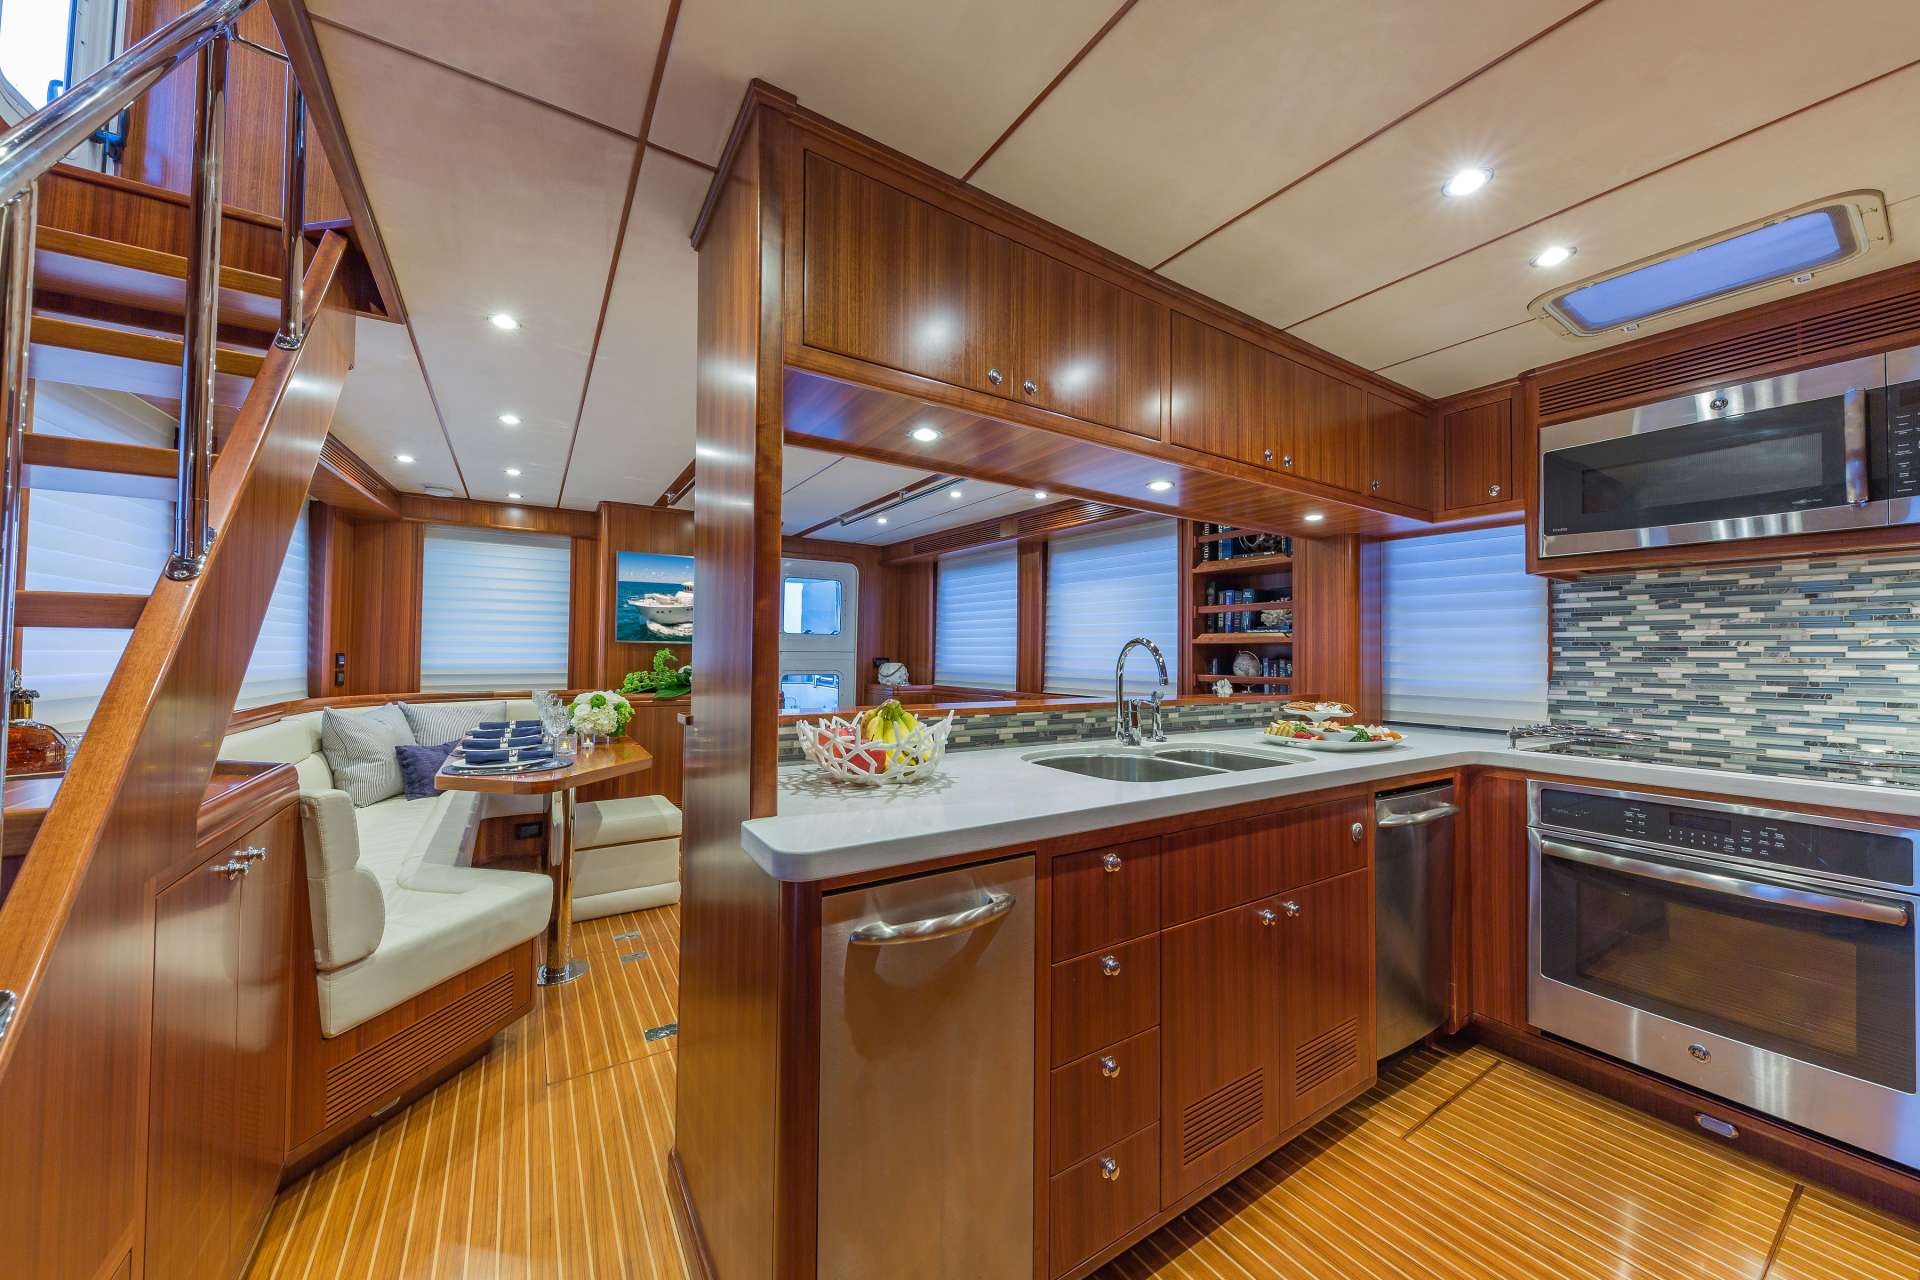 ASTURIAS Yacht Charter - Galley and Salon